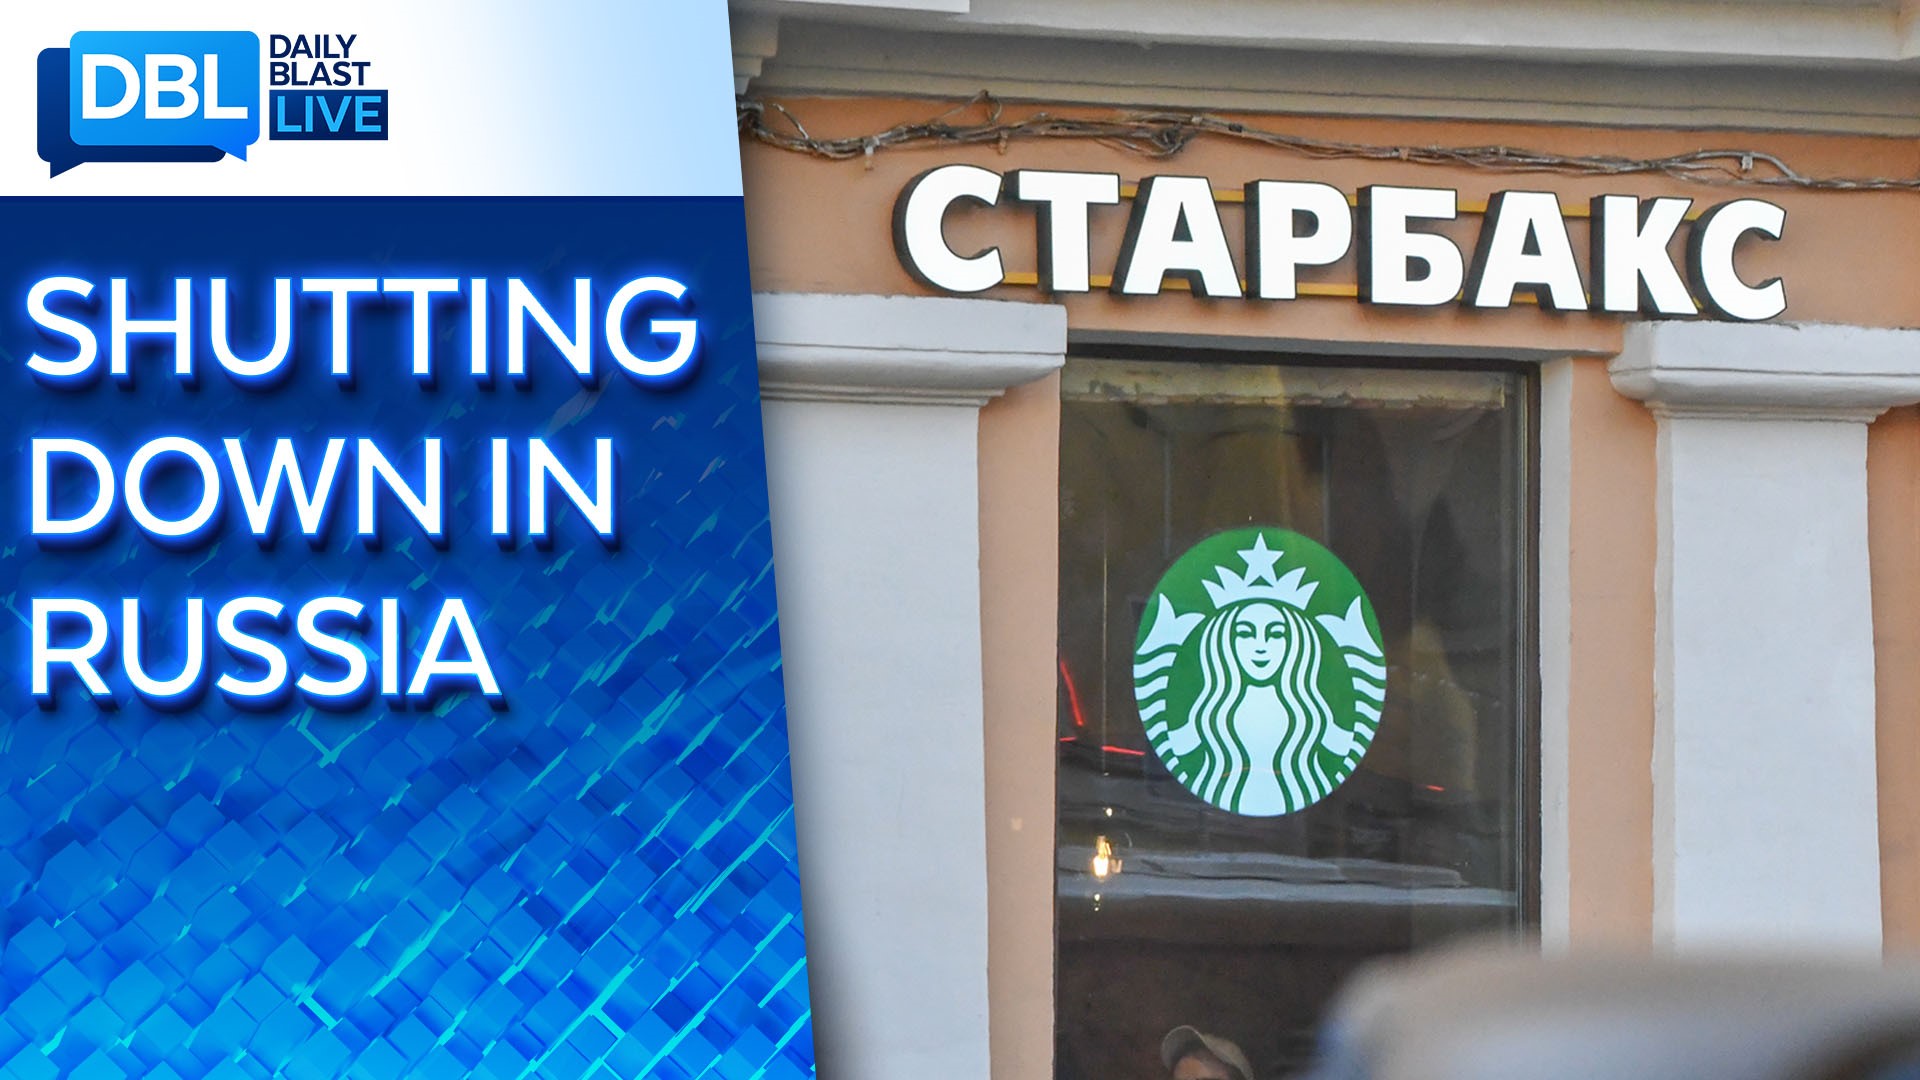 Several businesses, including Starbucks, McDonald's and Coca-Cola, have ceased operations in Russia, while some are still operating in the country.